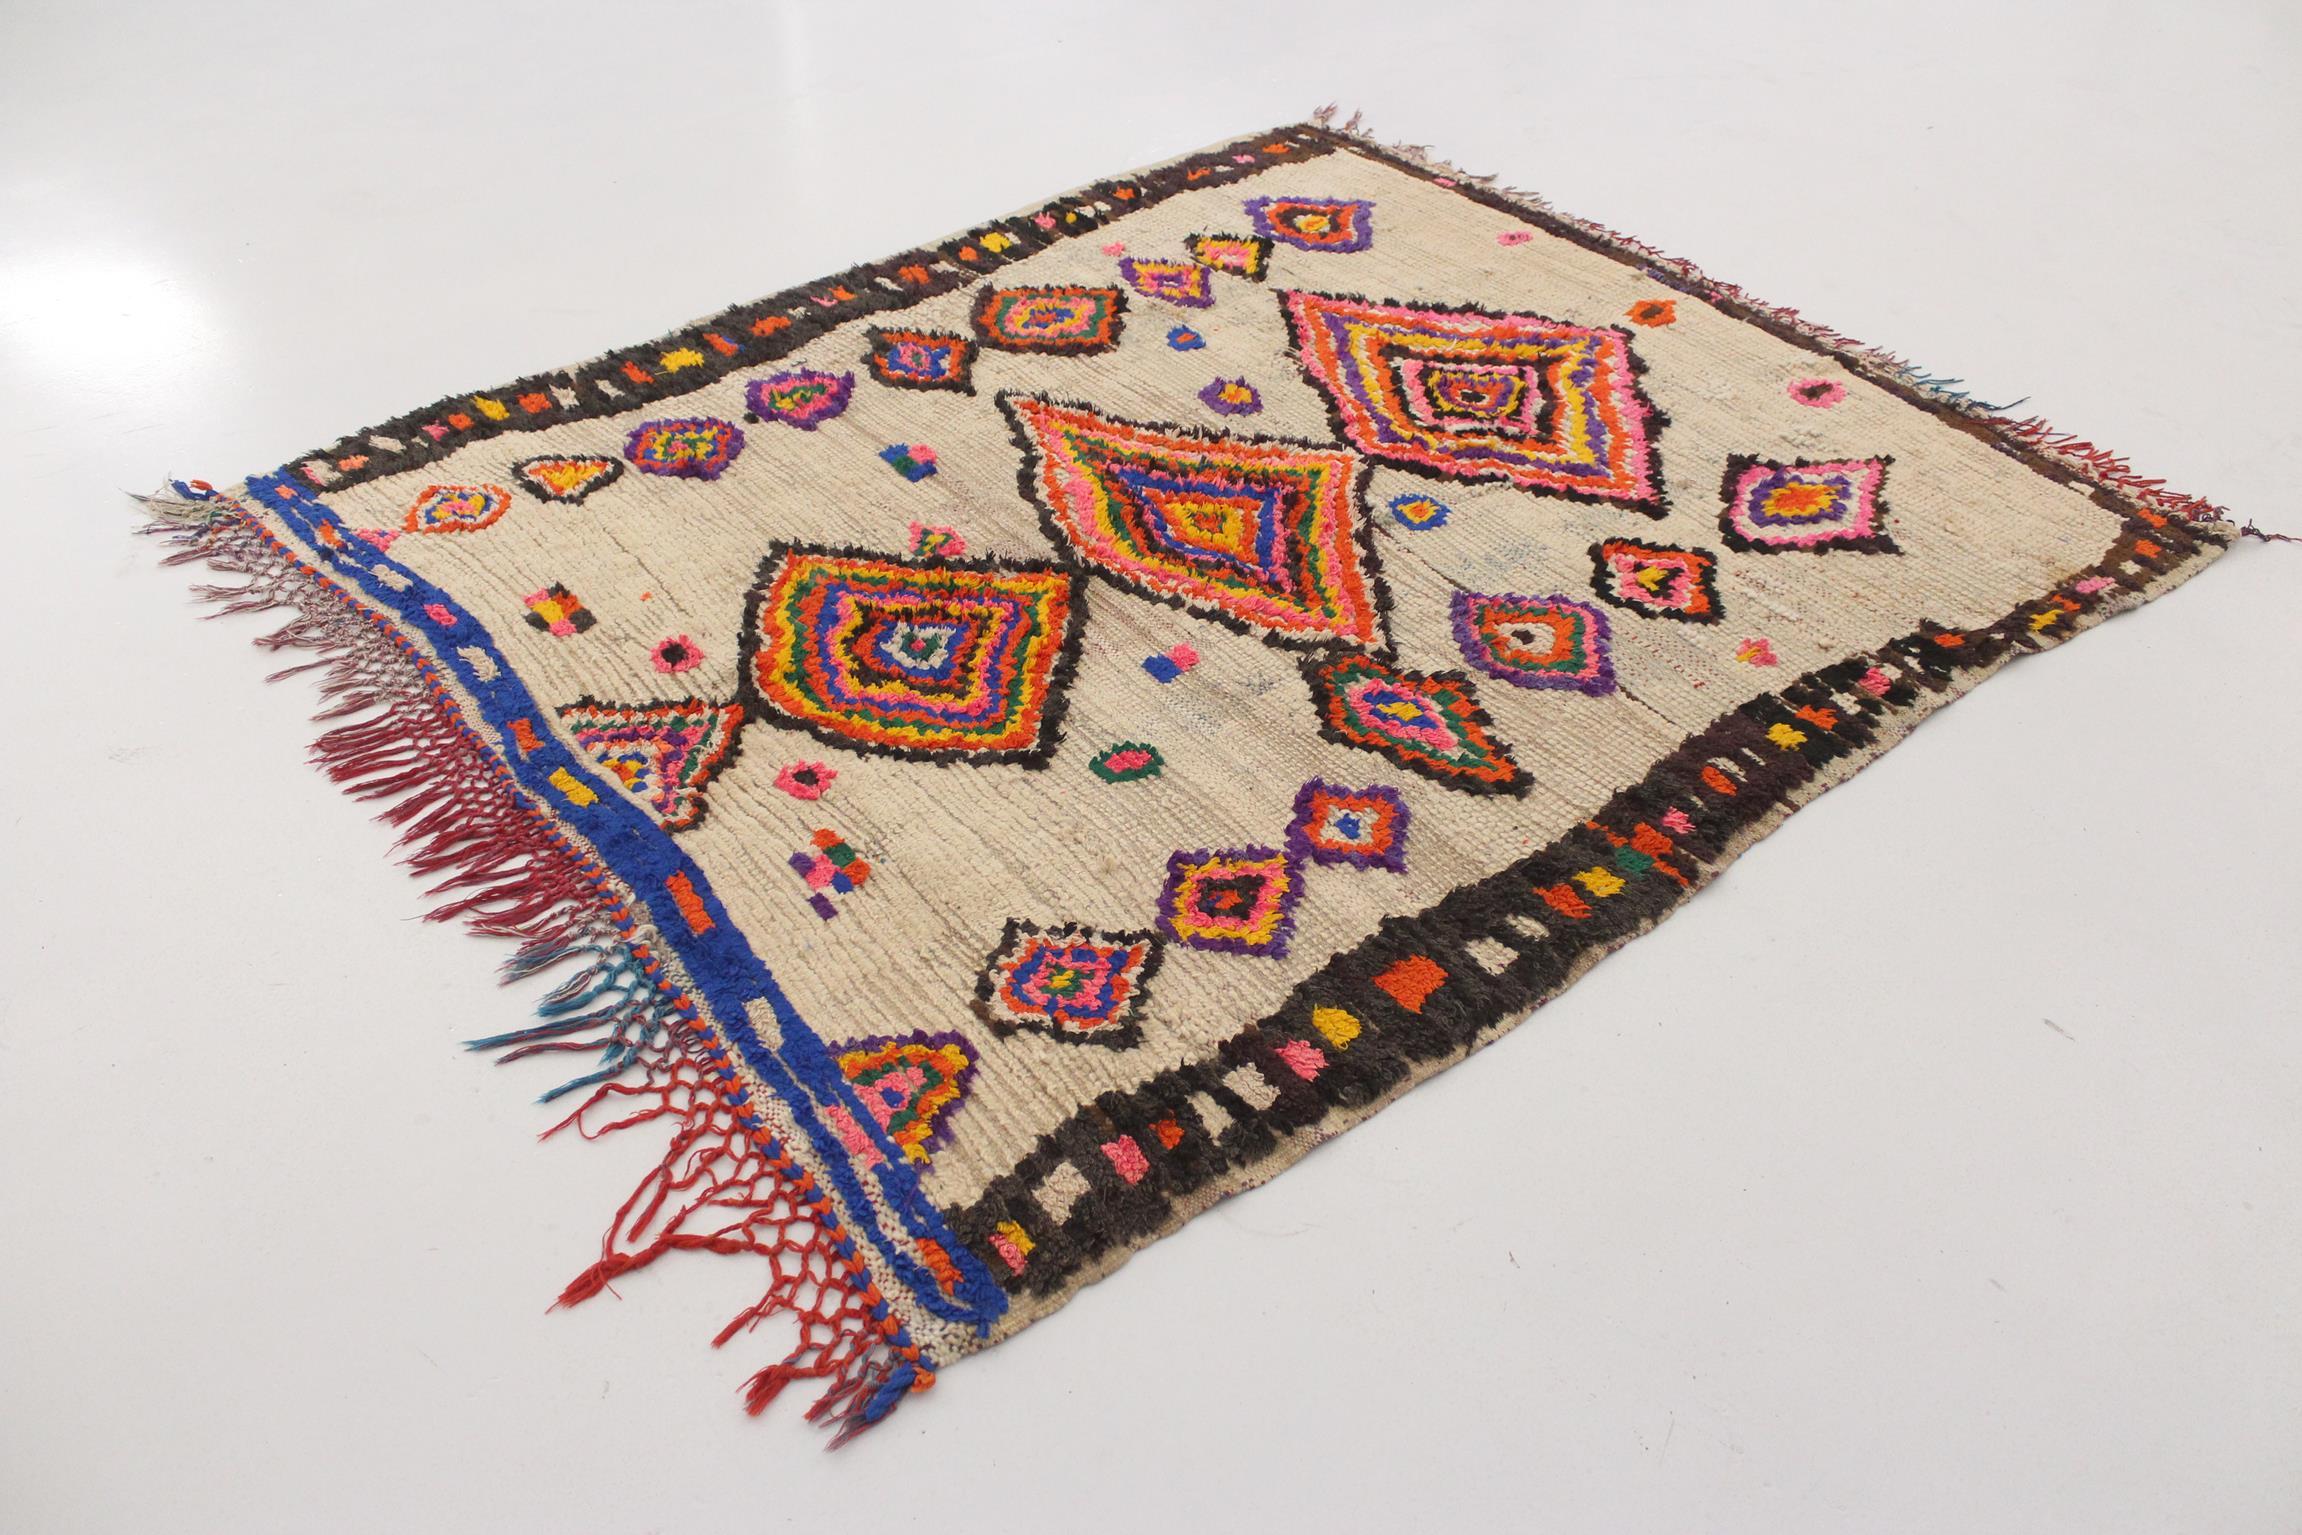 Hand-Woven Vintage Moroccan Azilal rug - Multicolor - 4.7x5.4feet / 144x164cm For Sale